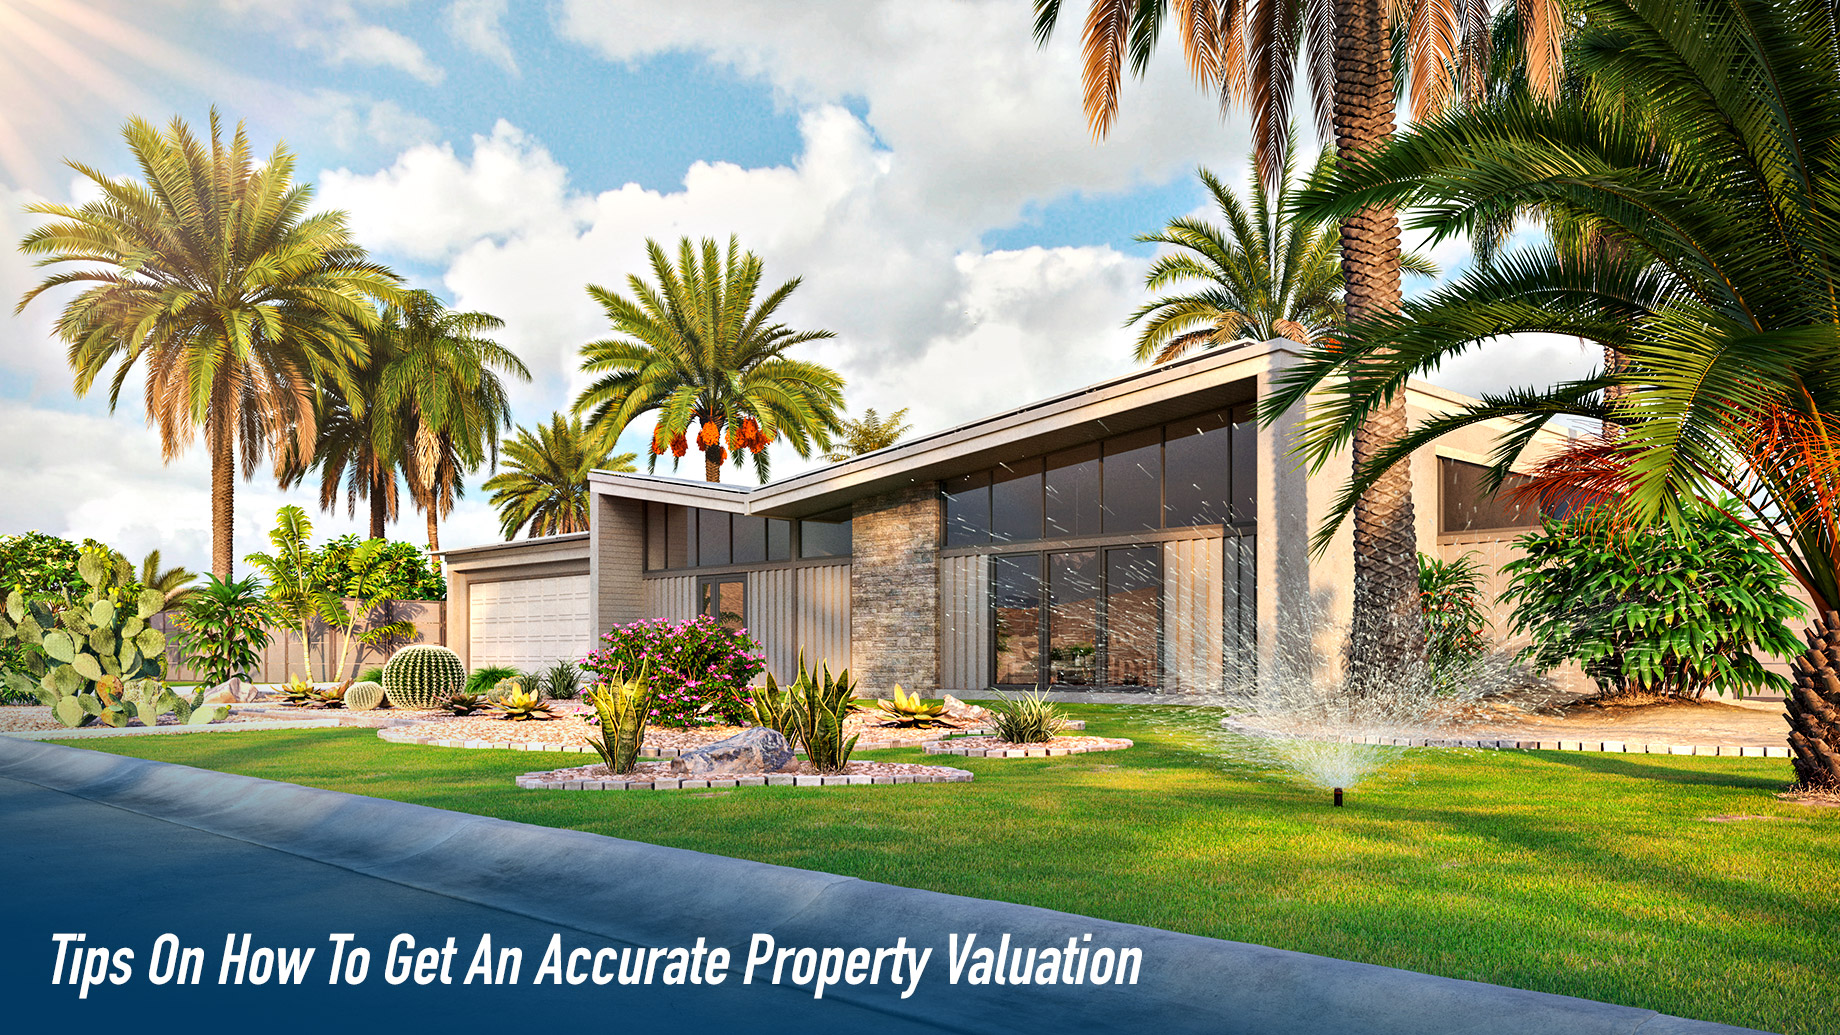 Tips On How To Get An Accurate Property Valuation